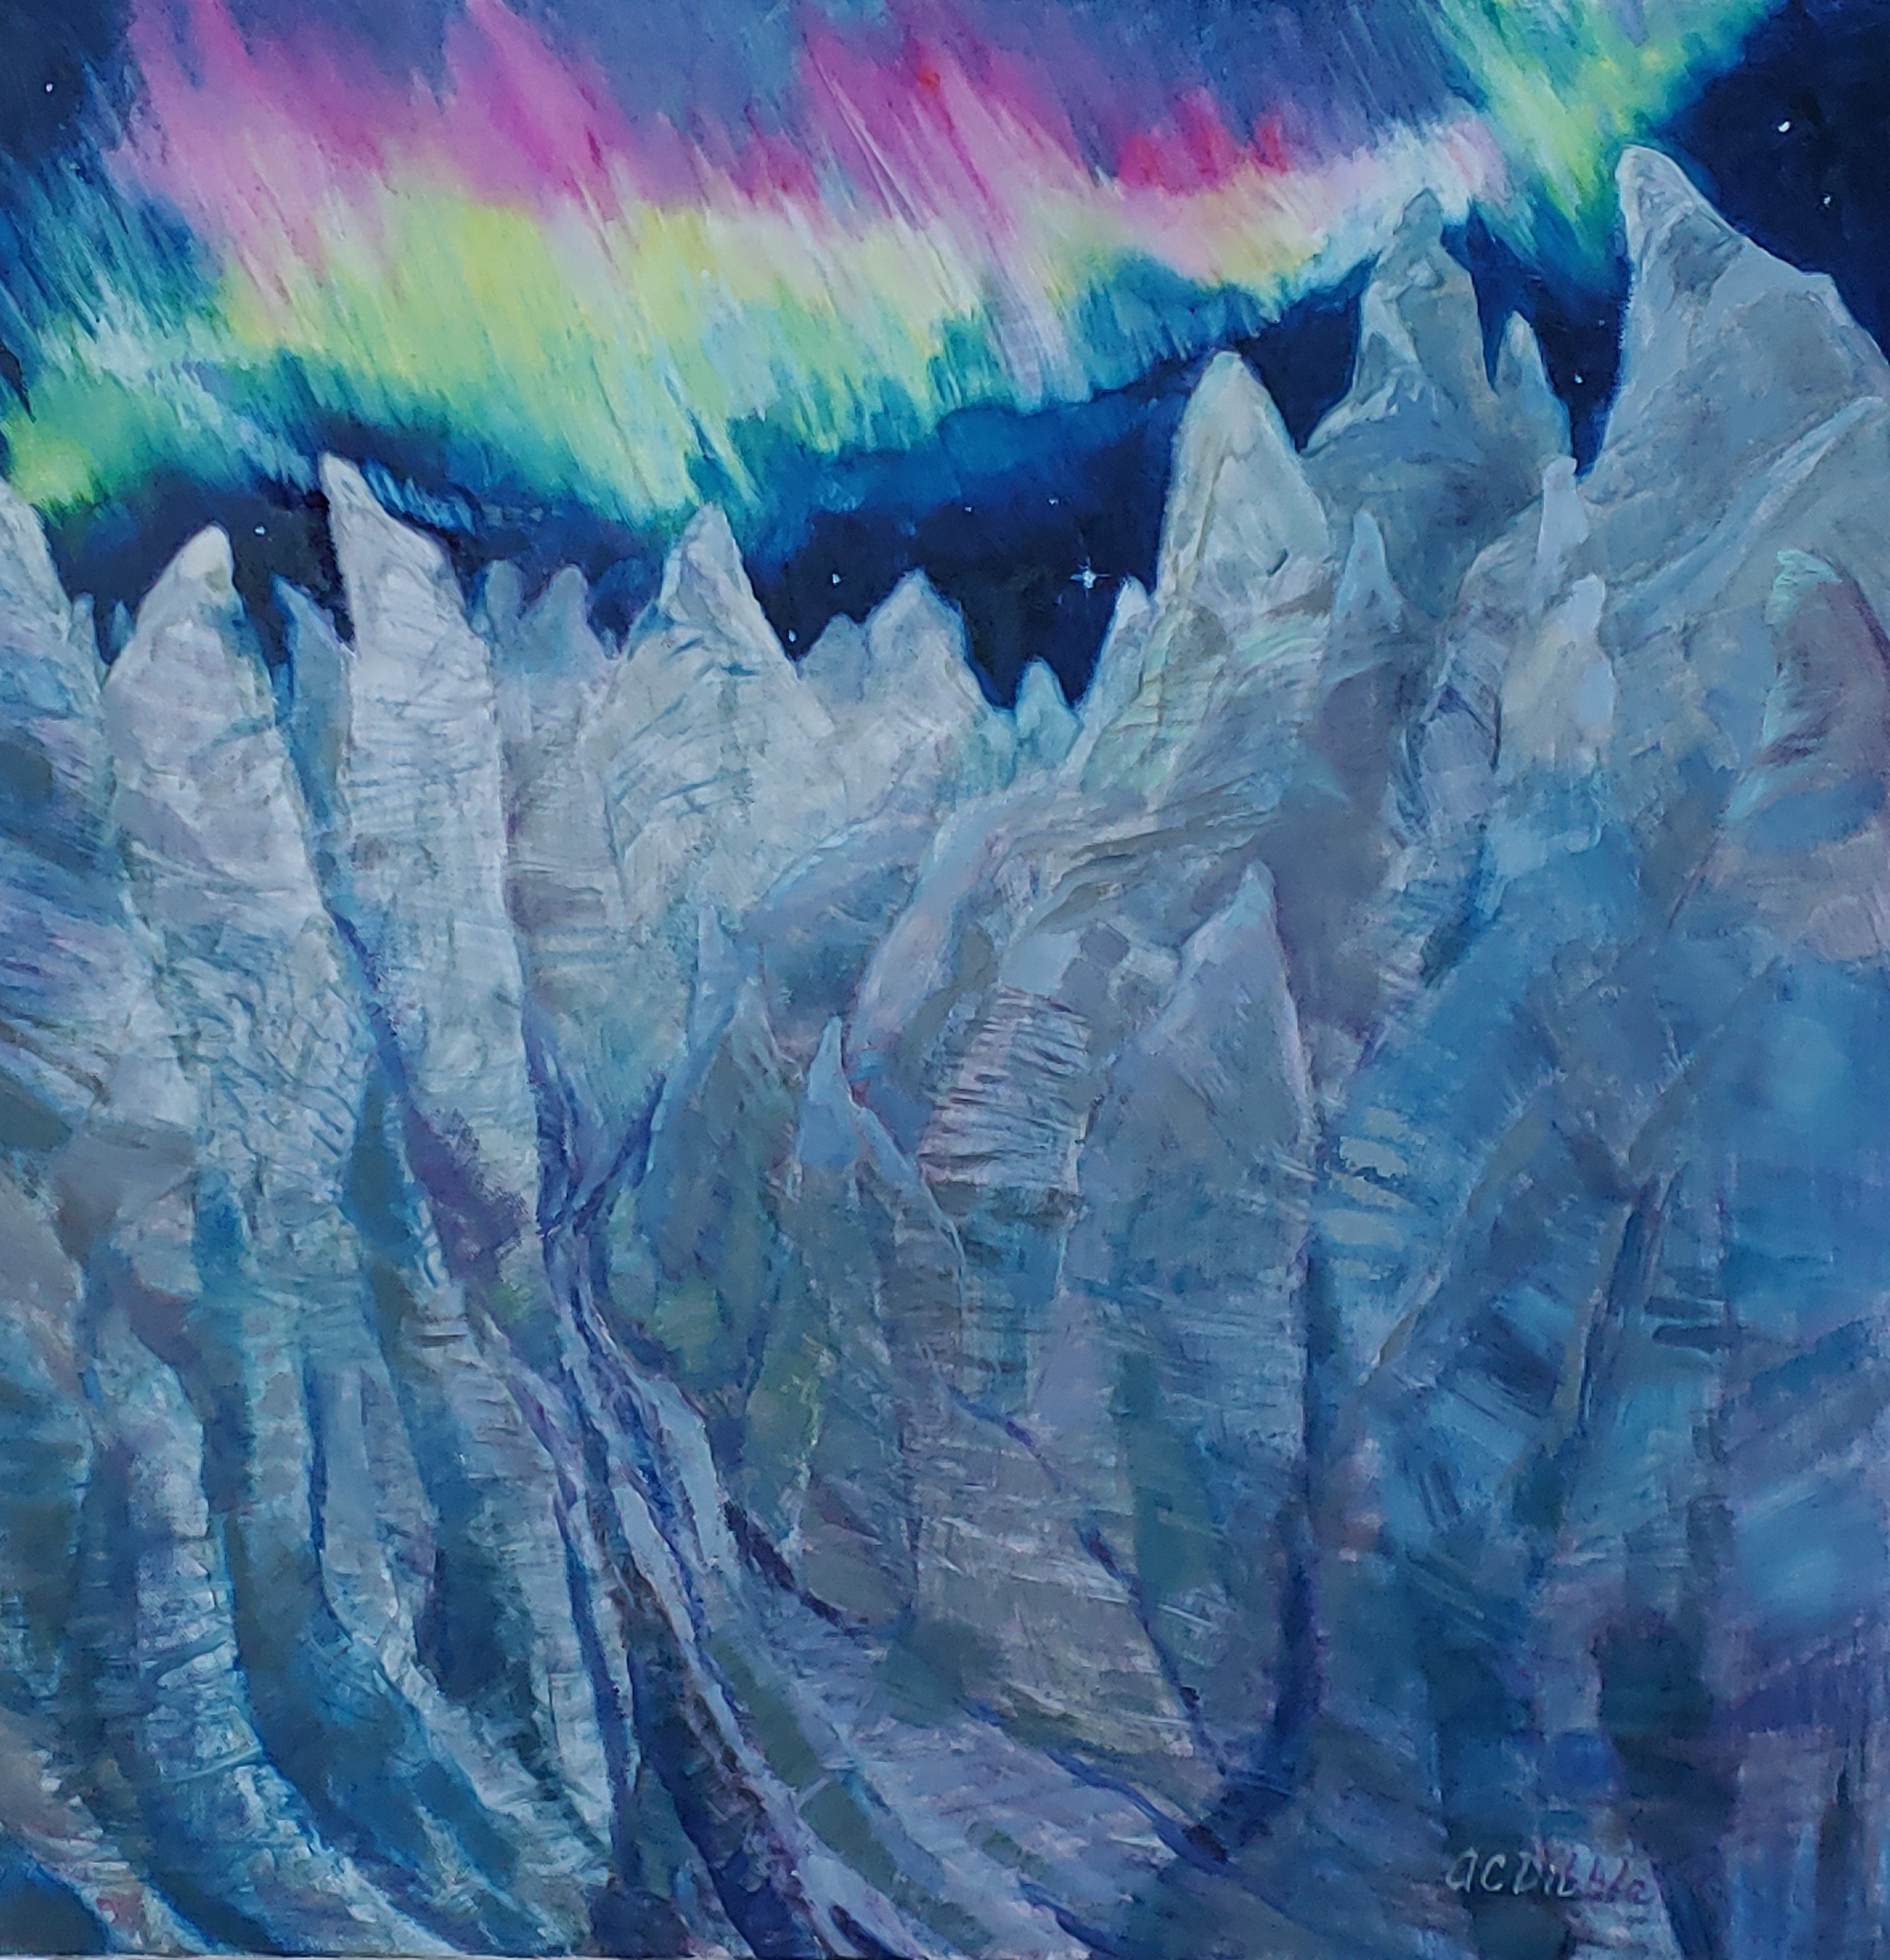 Aurora-Borealis-above-the-Crevasse,-24in-x-24in,-oil-on-canvas,-2021-by-Alison-C.-Dibble.jpg